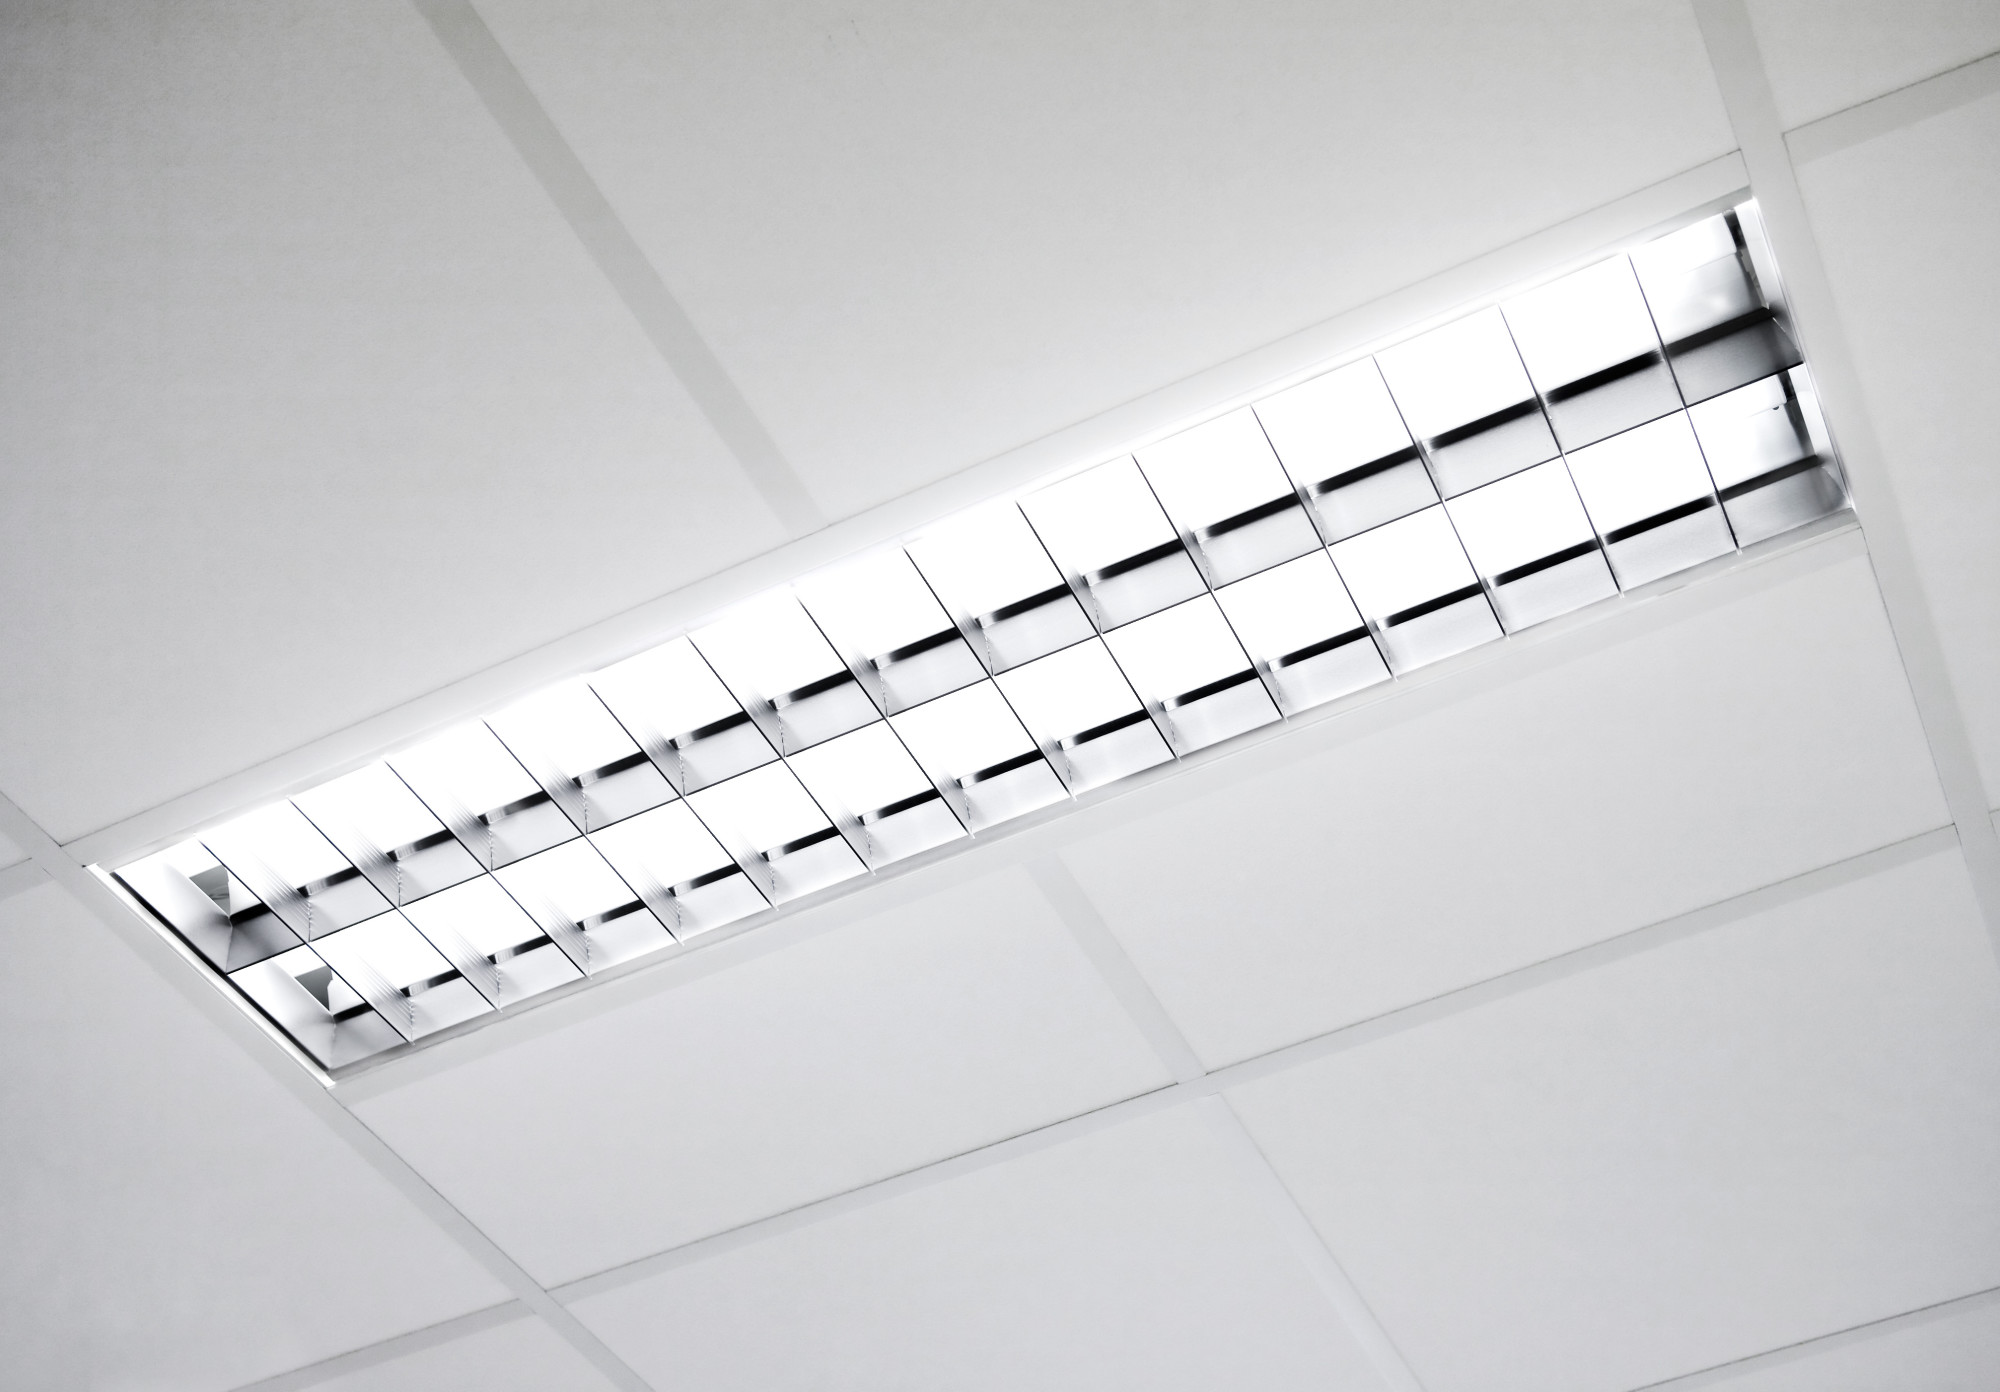 A fluorescent light set in the roof